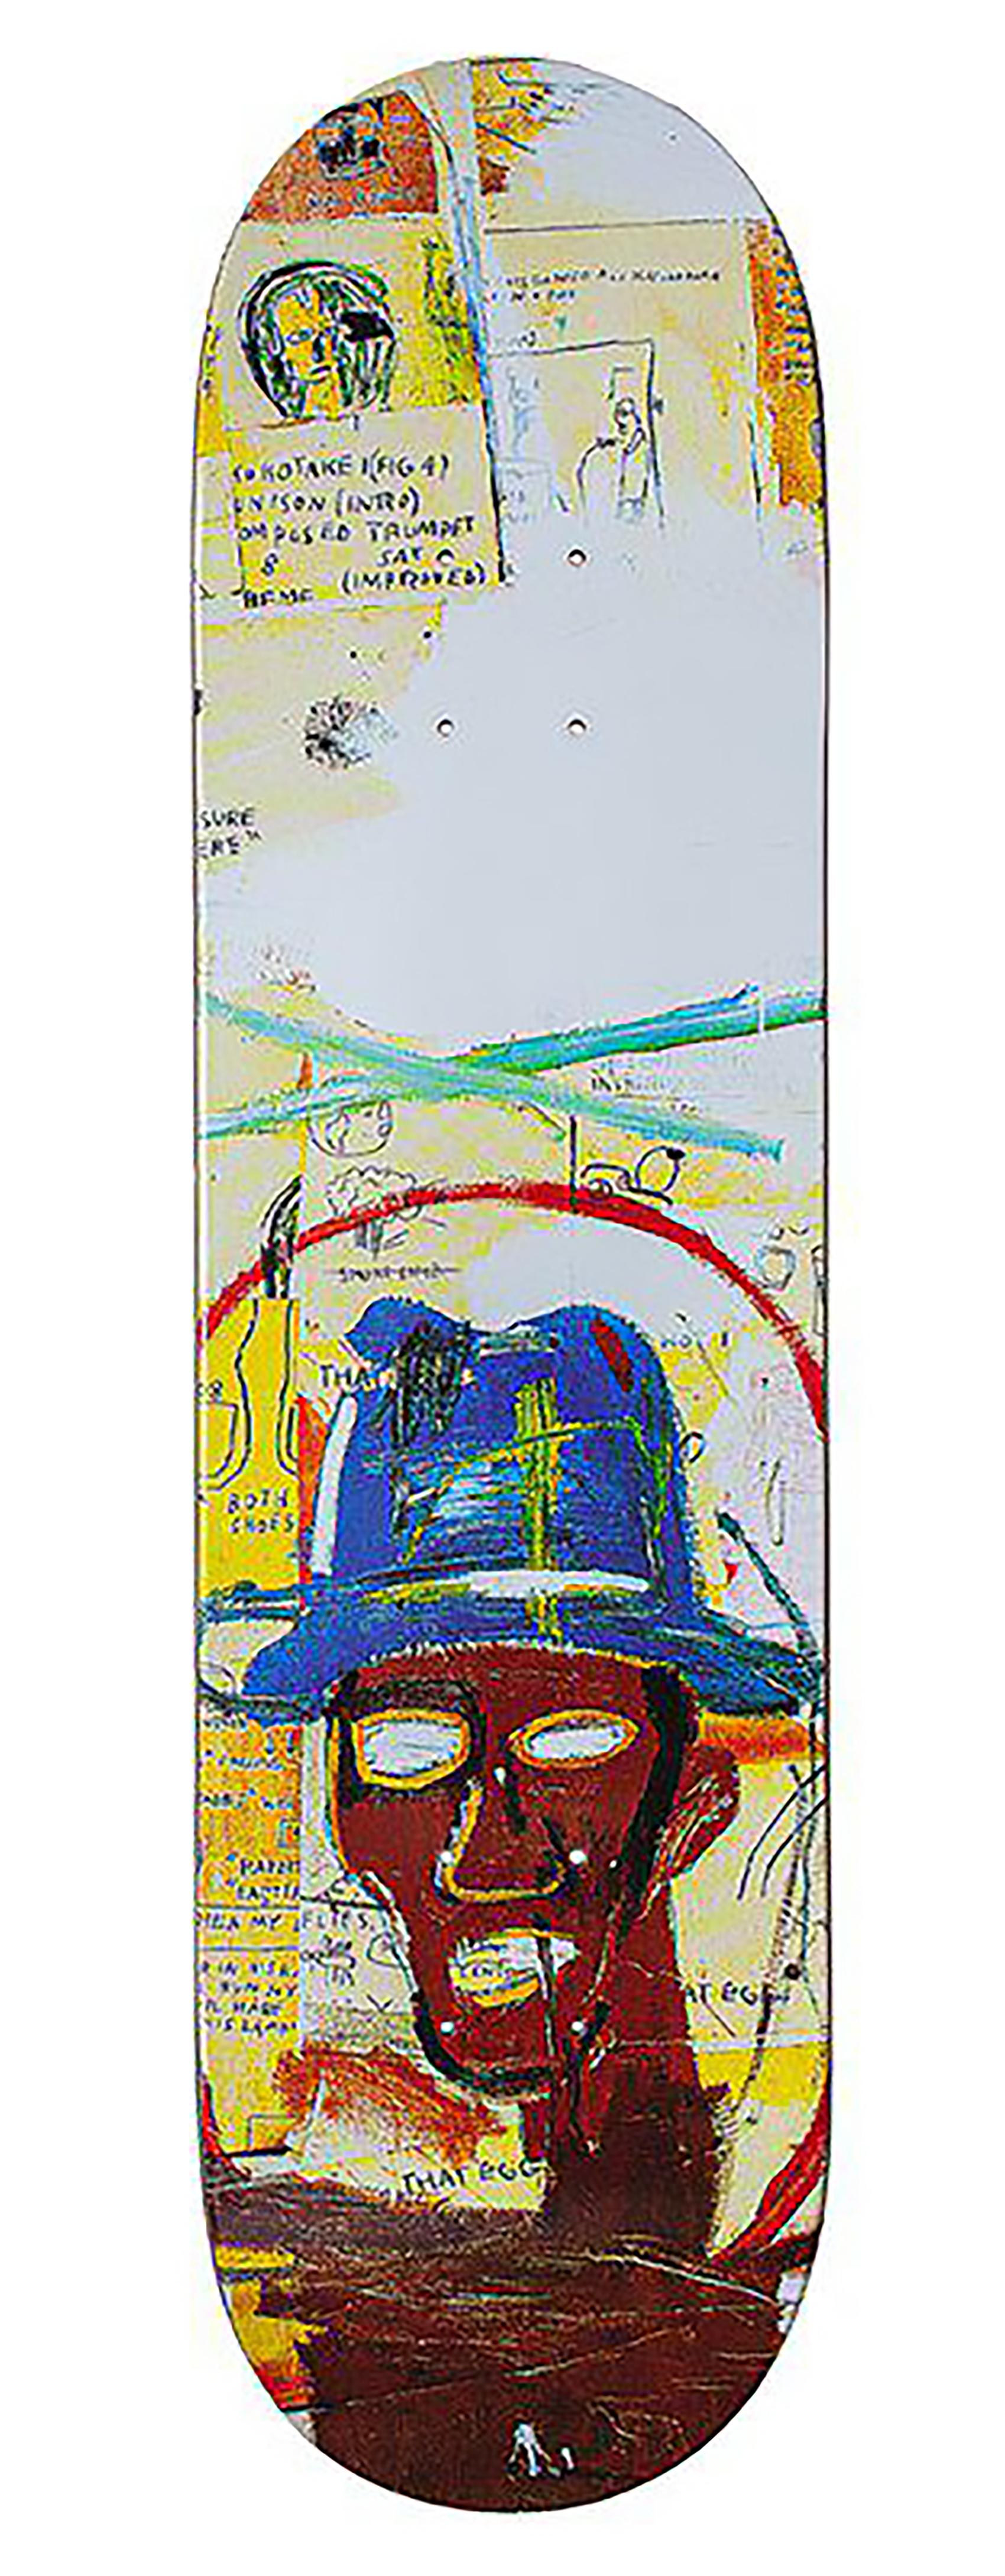 Basquiat Skateboard Decks Set of 3 (2019-2020):
Vibrant, superbly rendered Basquiat Skateboard Decks licensed by the Estate of Jean Michel Basquiat in conjunction with Artestar, featuring reproductions of the much iconic early eighties works,